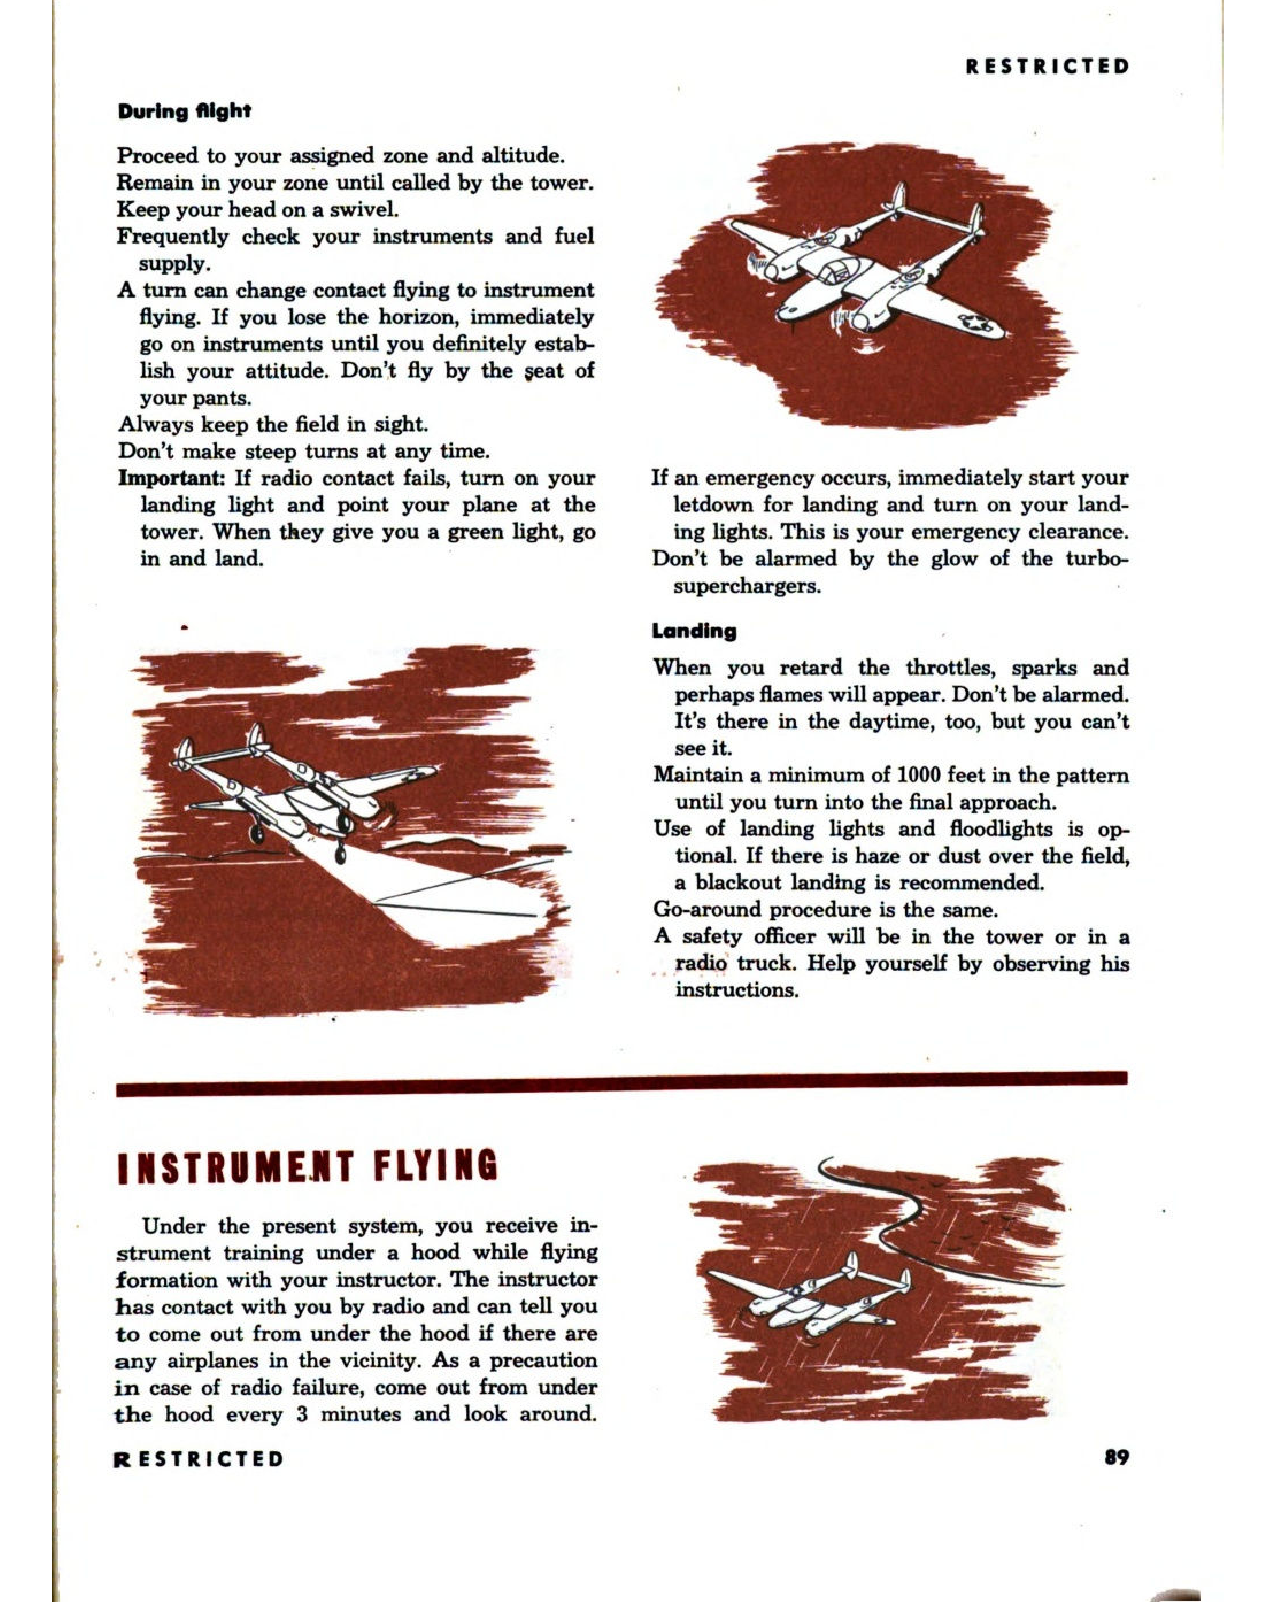 Sample page 90 from AirCorps Library document: Pilot Training Manual - P-38